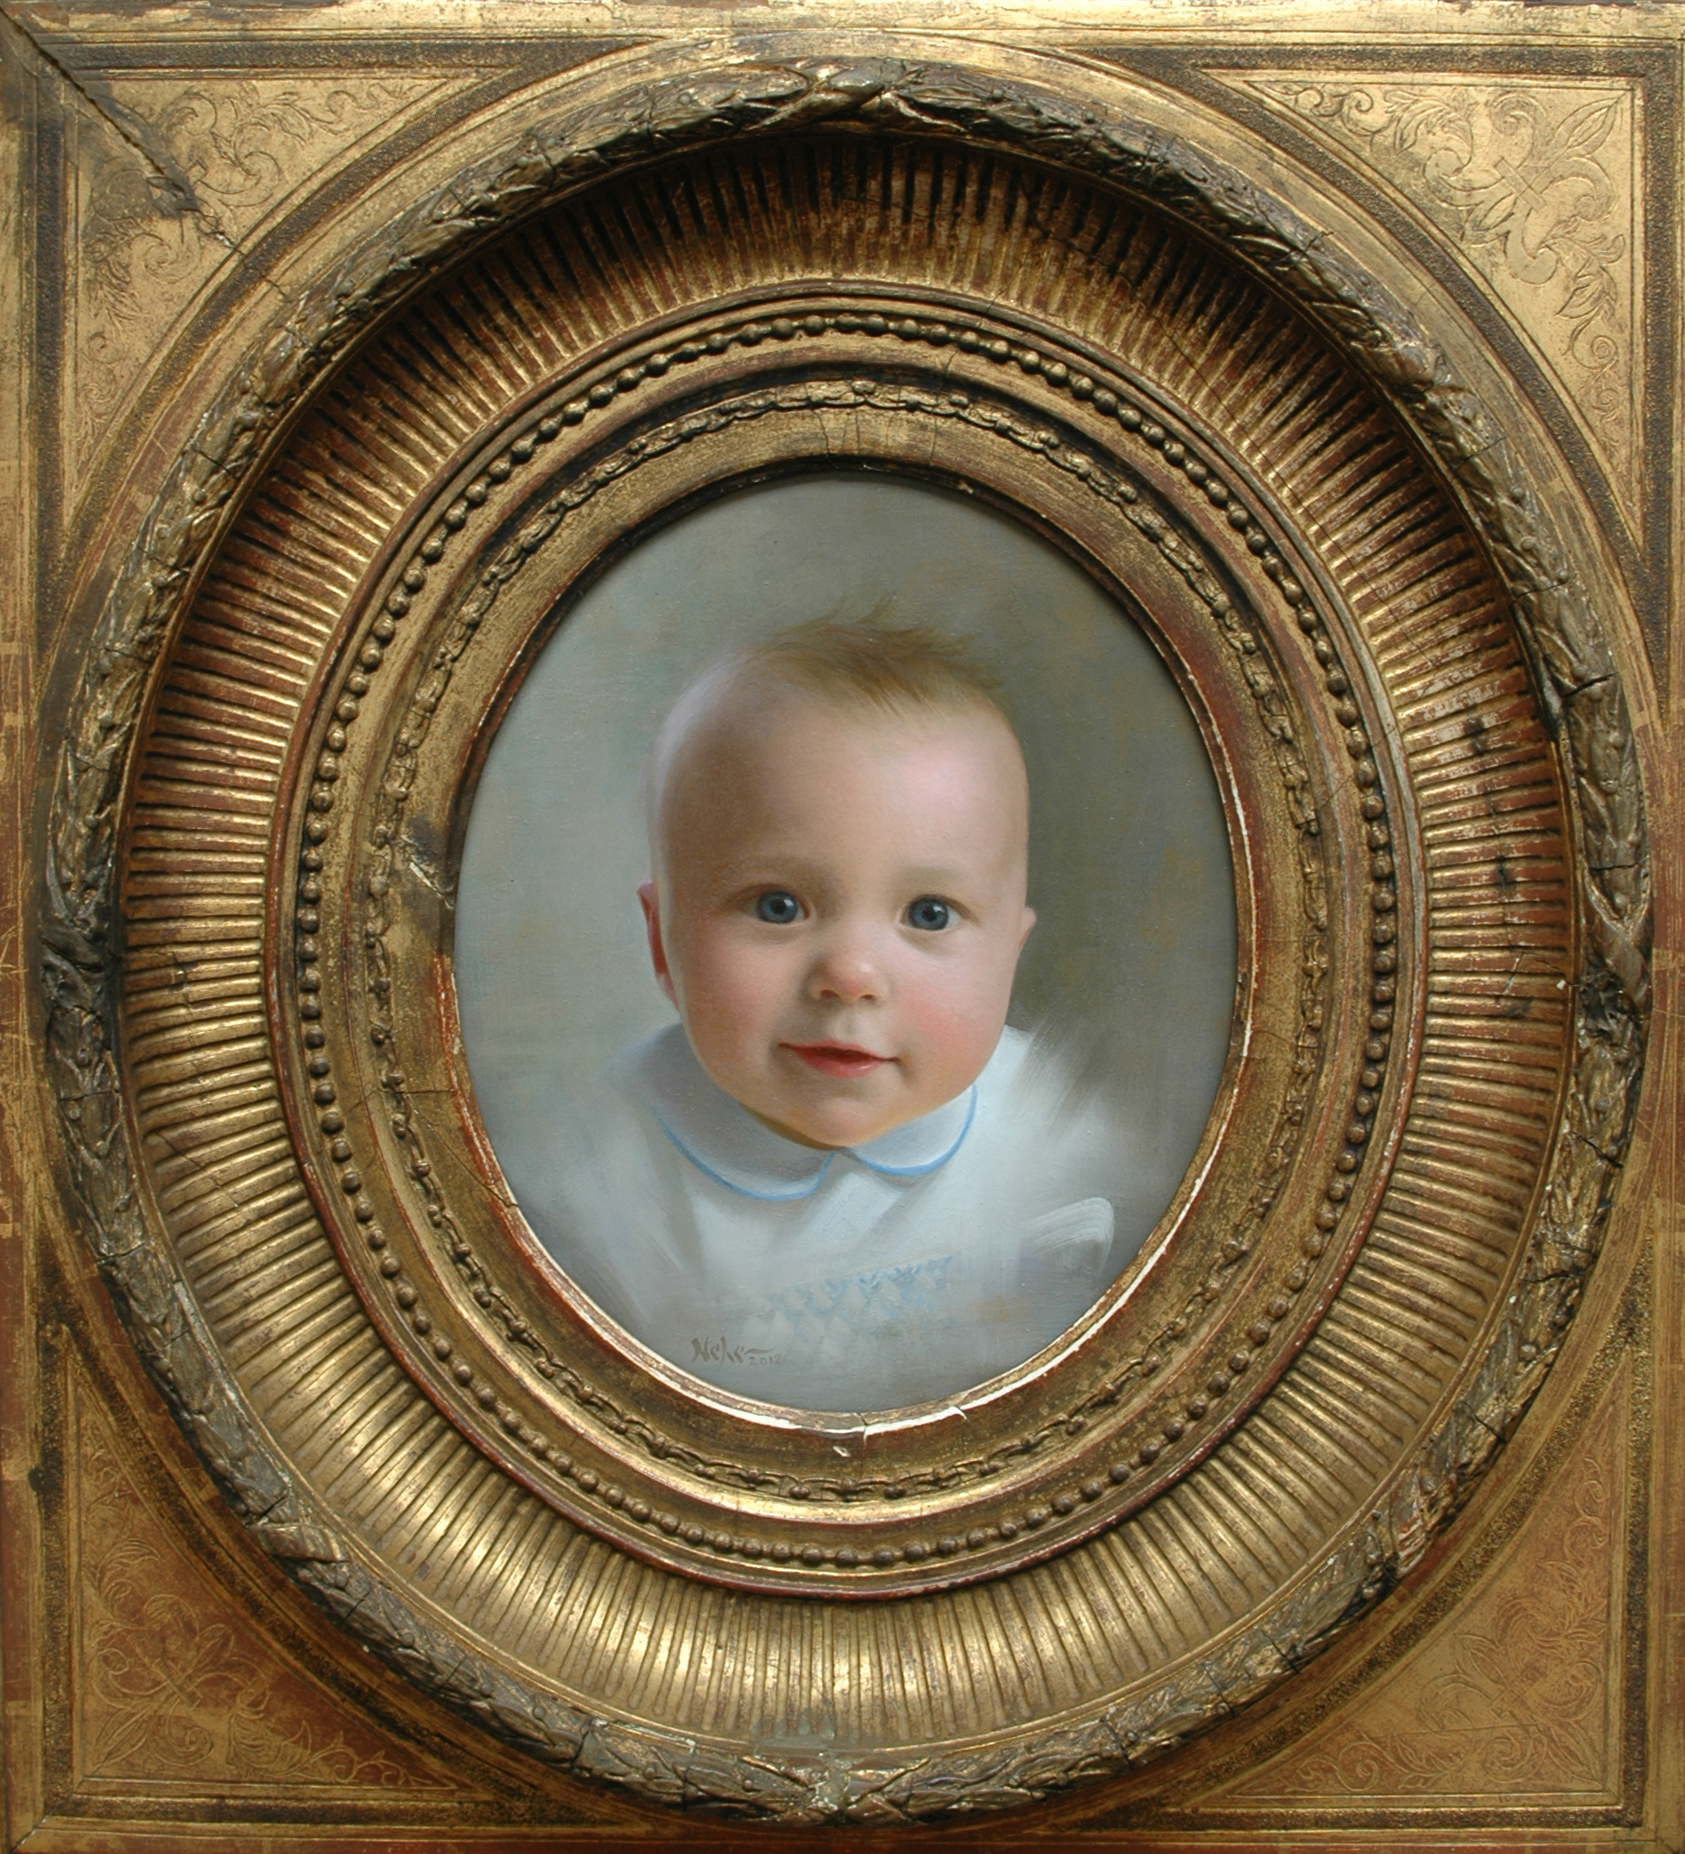 Portrait painting of a baby